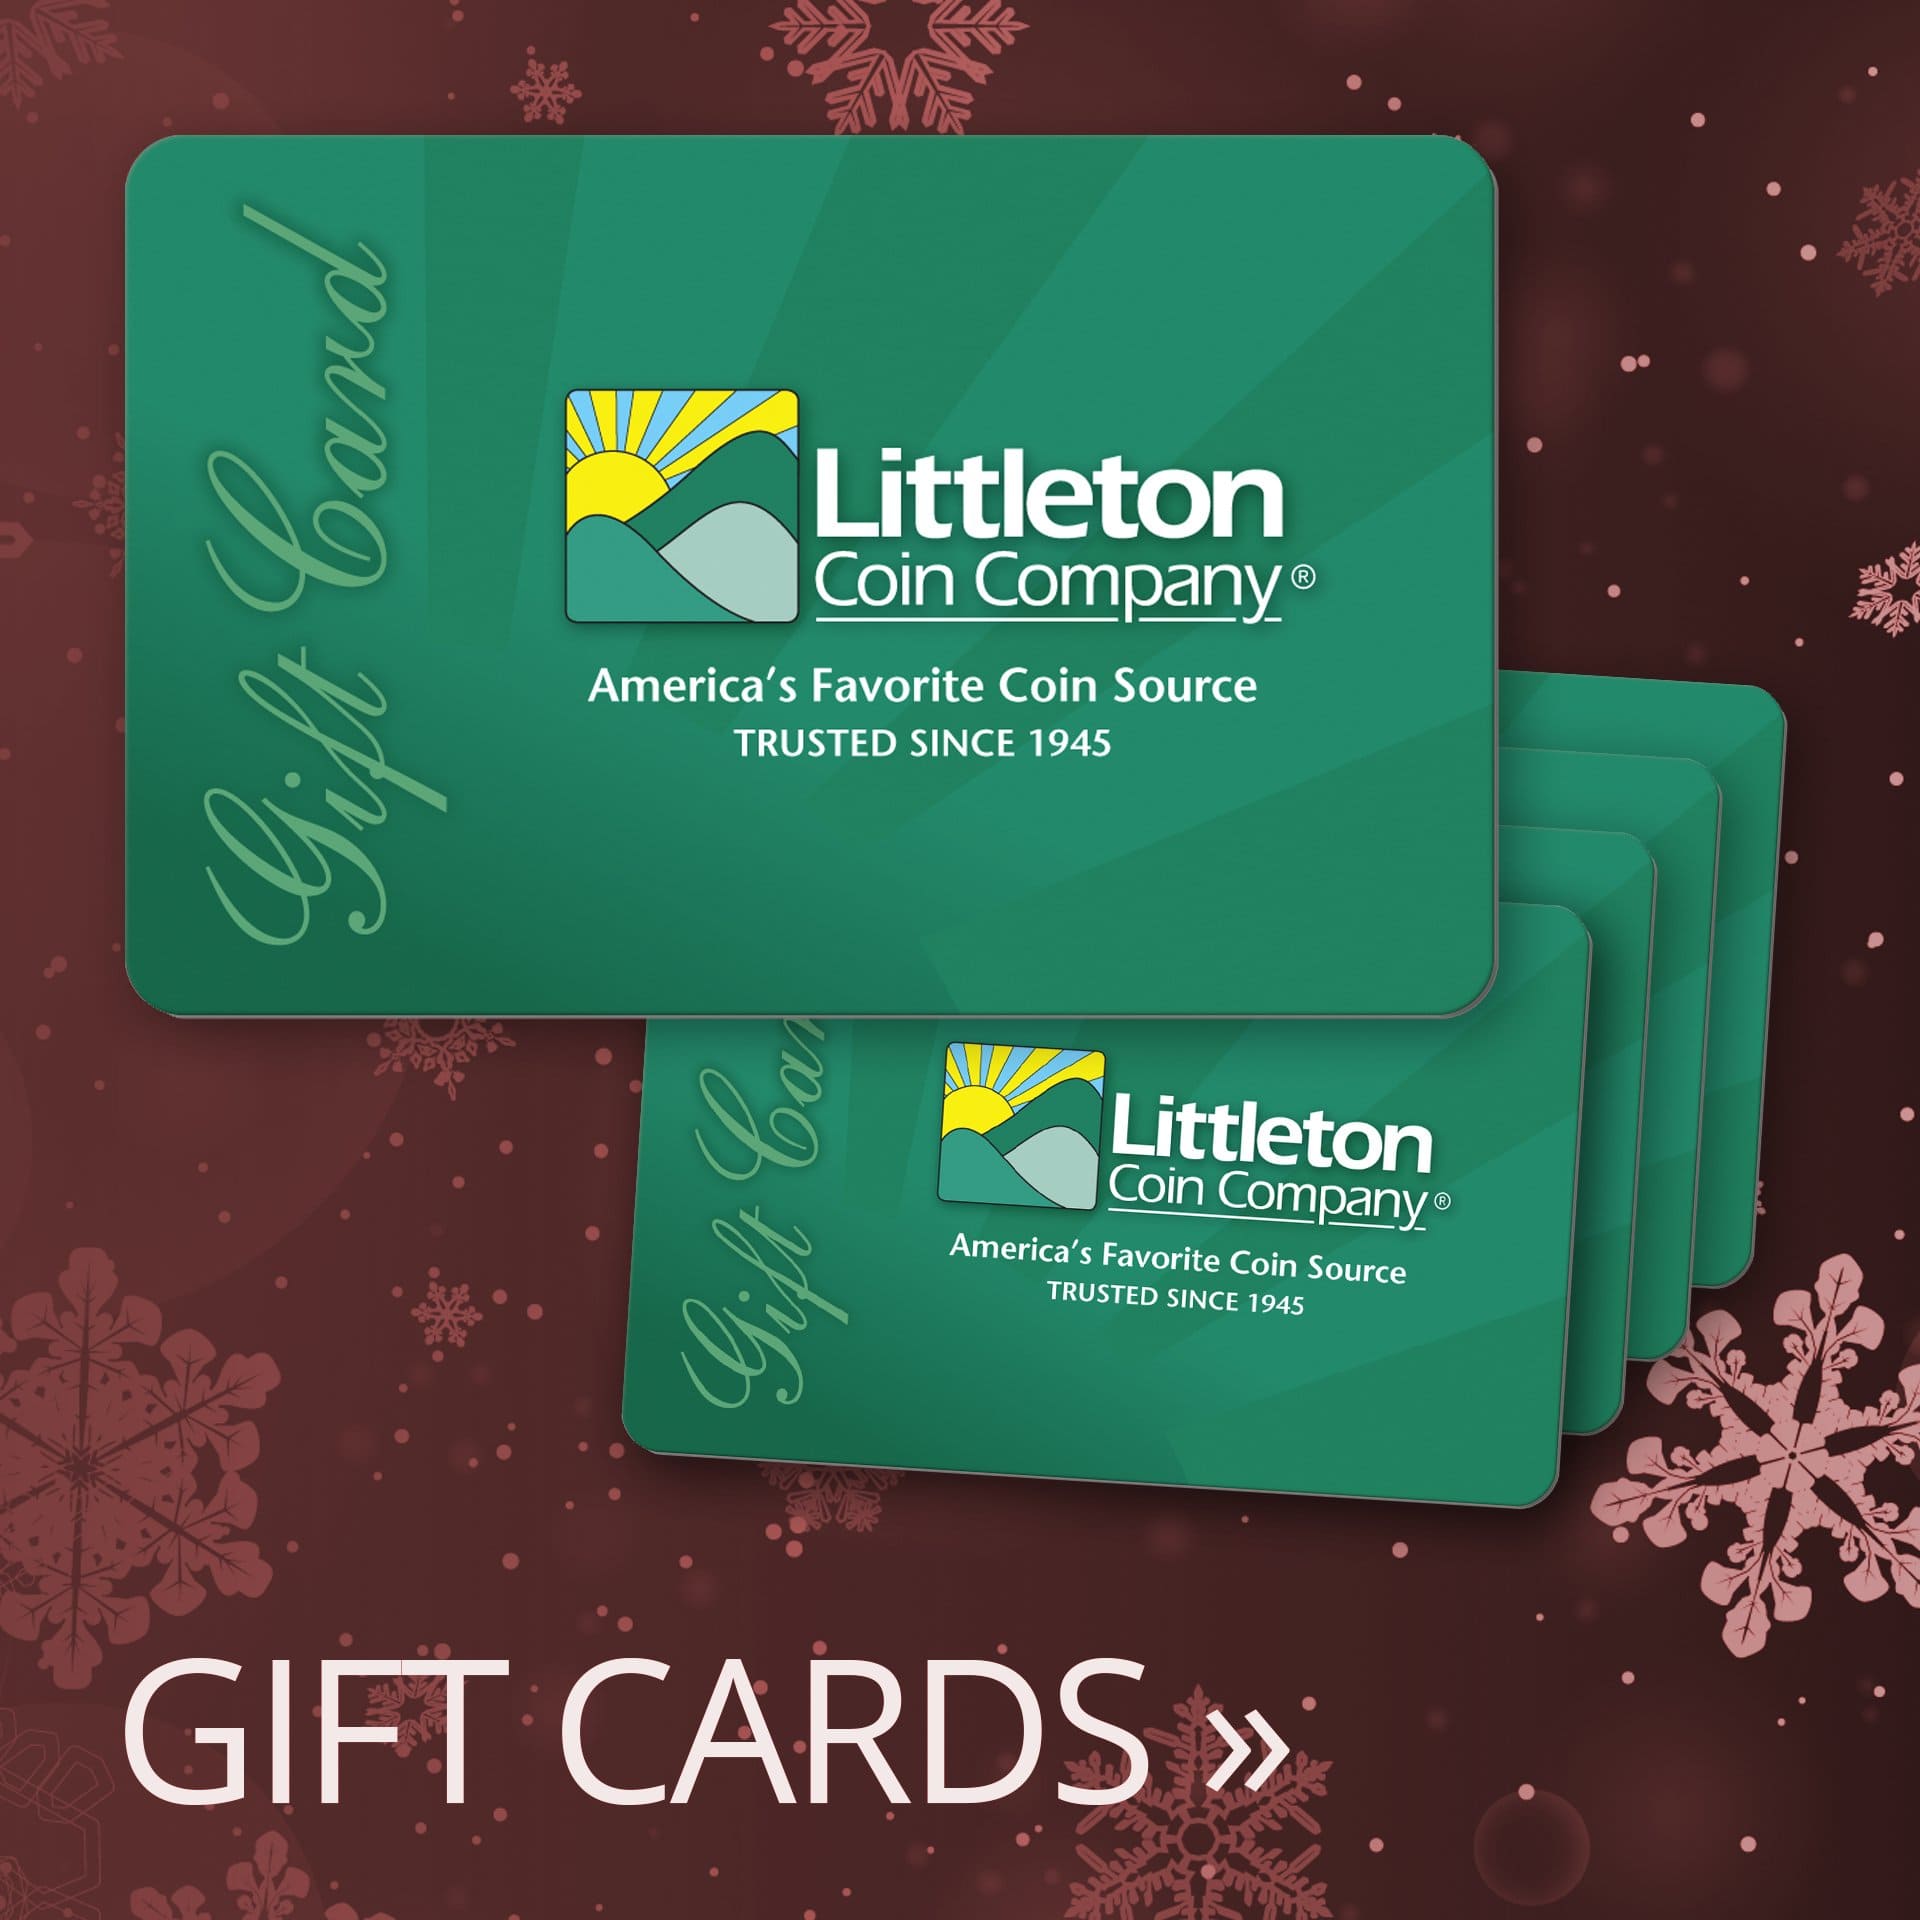 Finding the Perfect Holiday Gift in 2020 - Littleton Coin Blog